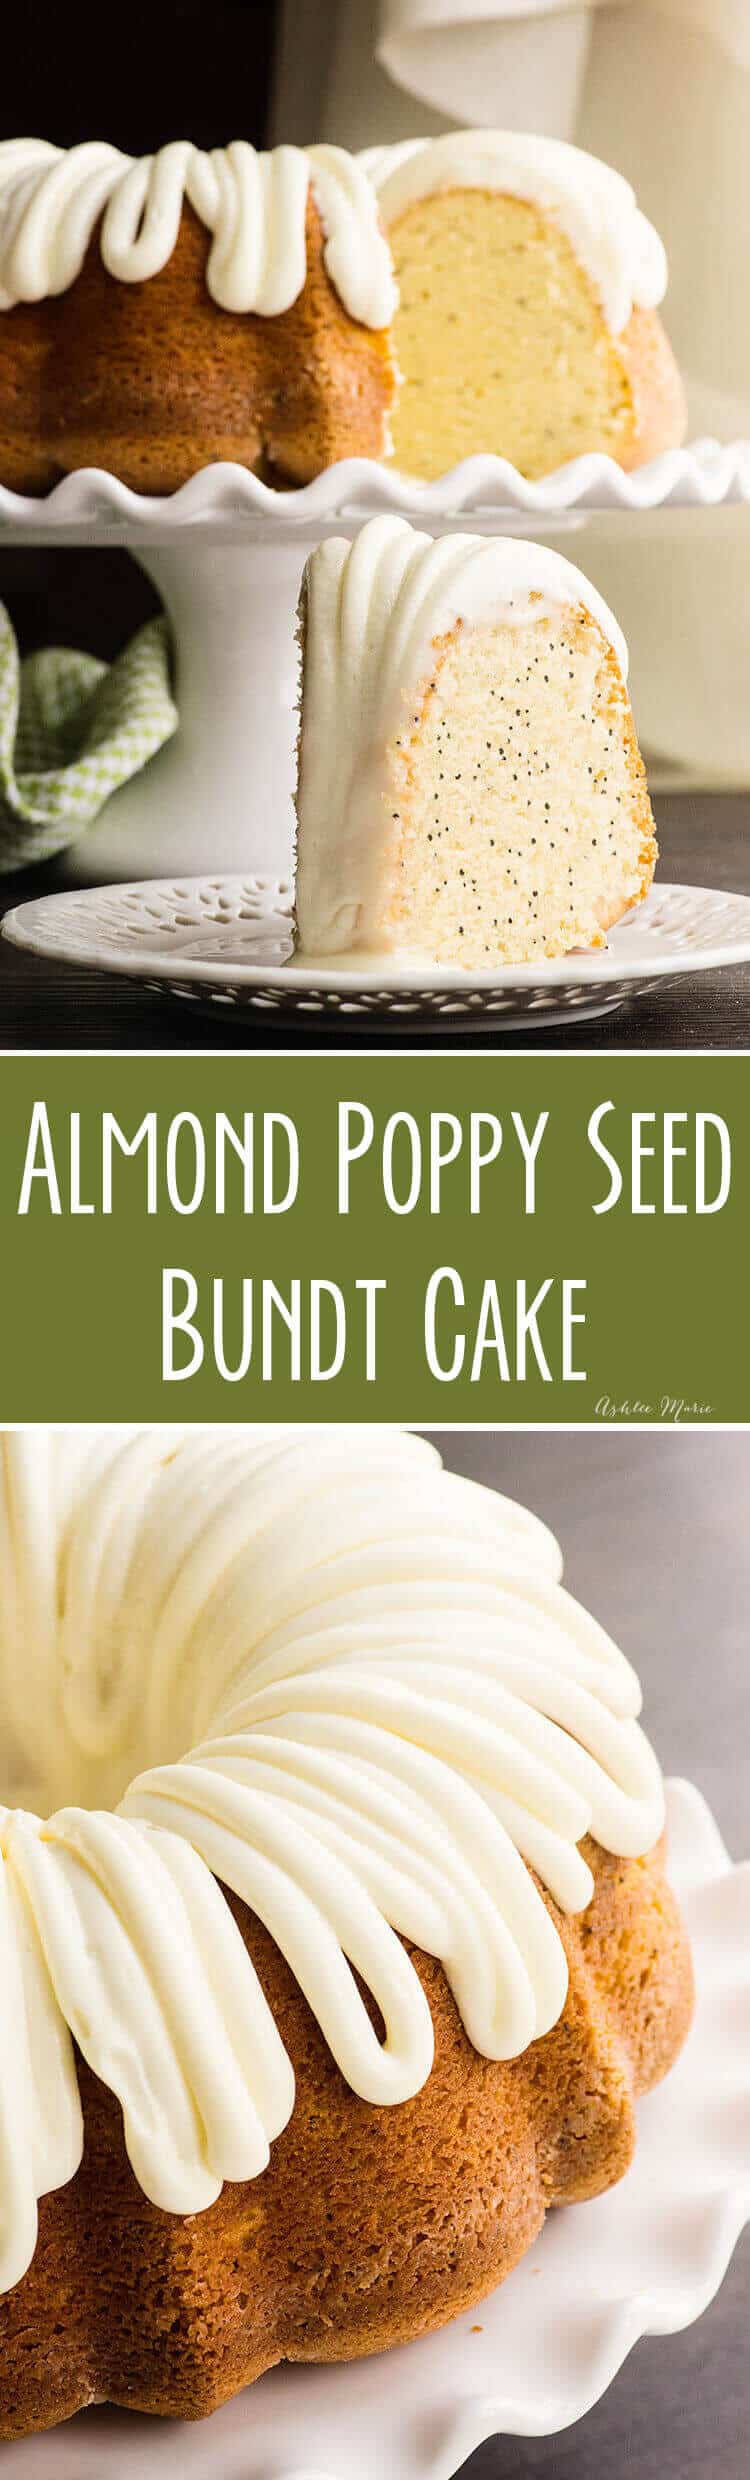 this almond poppyseed bundt cake is light and fluffy and has great texture and flavor - add the cream cheese frosting for a creamy sweet bite